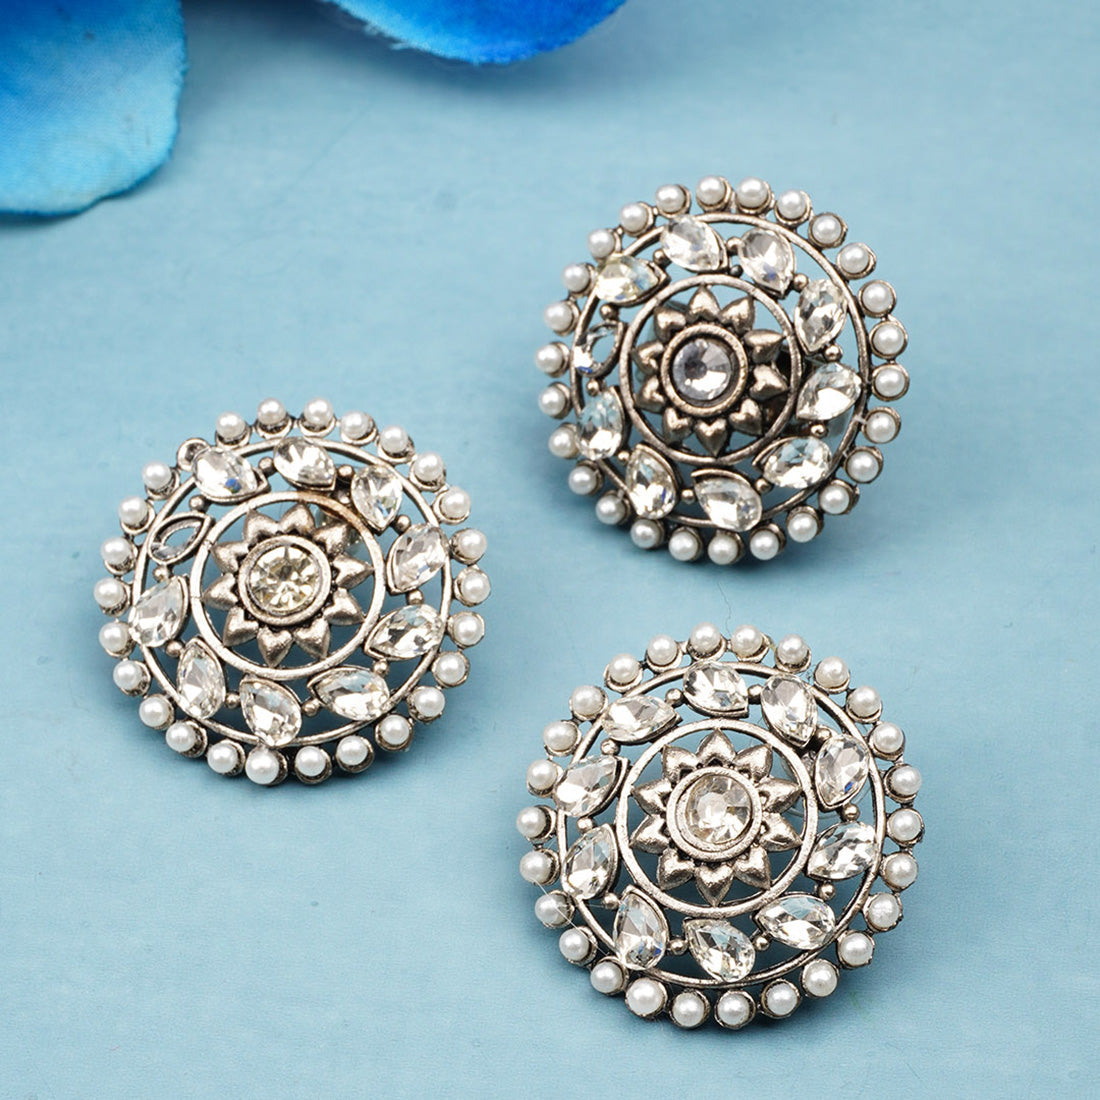 Crystal Oxidized Ring Stud Earring Set
